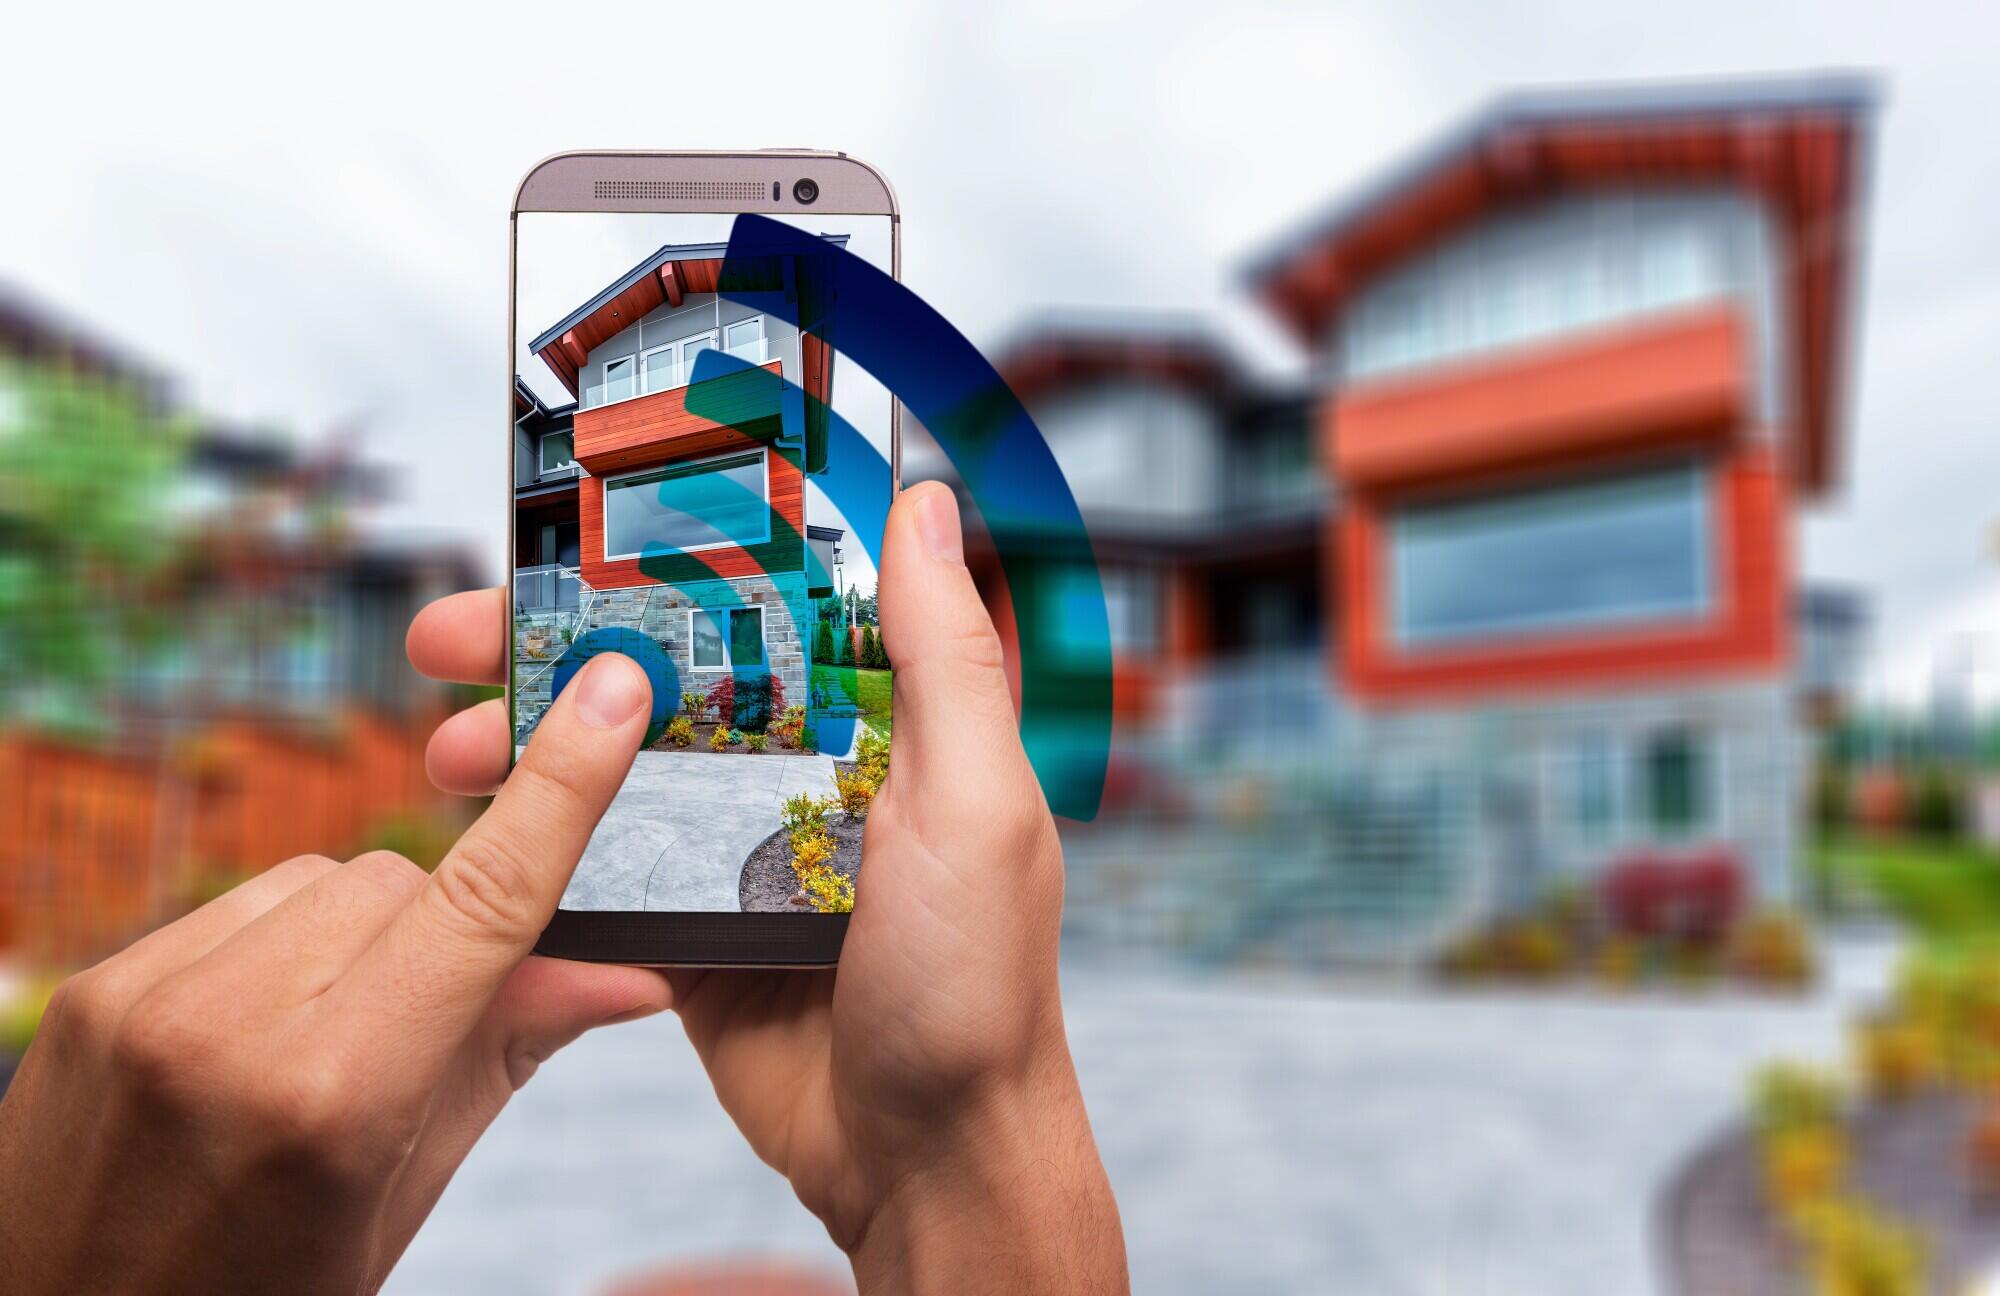 Top 5 Building Security and Access Control Trends in Murray, UT